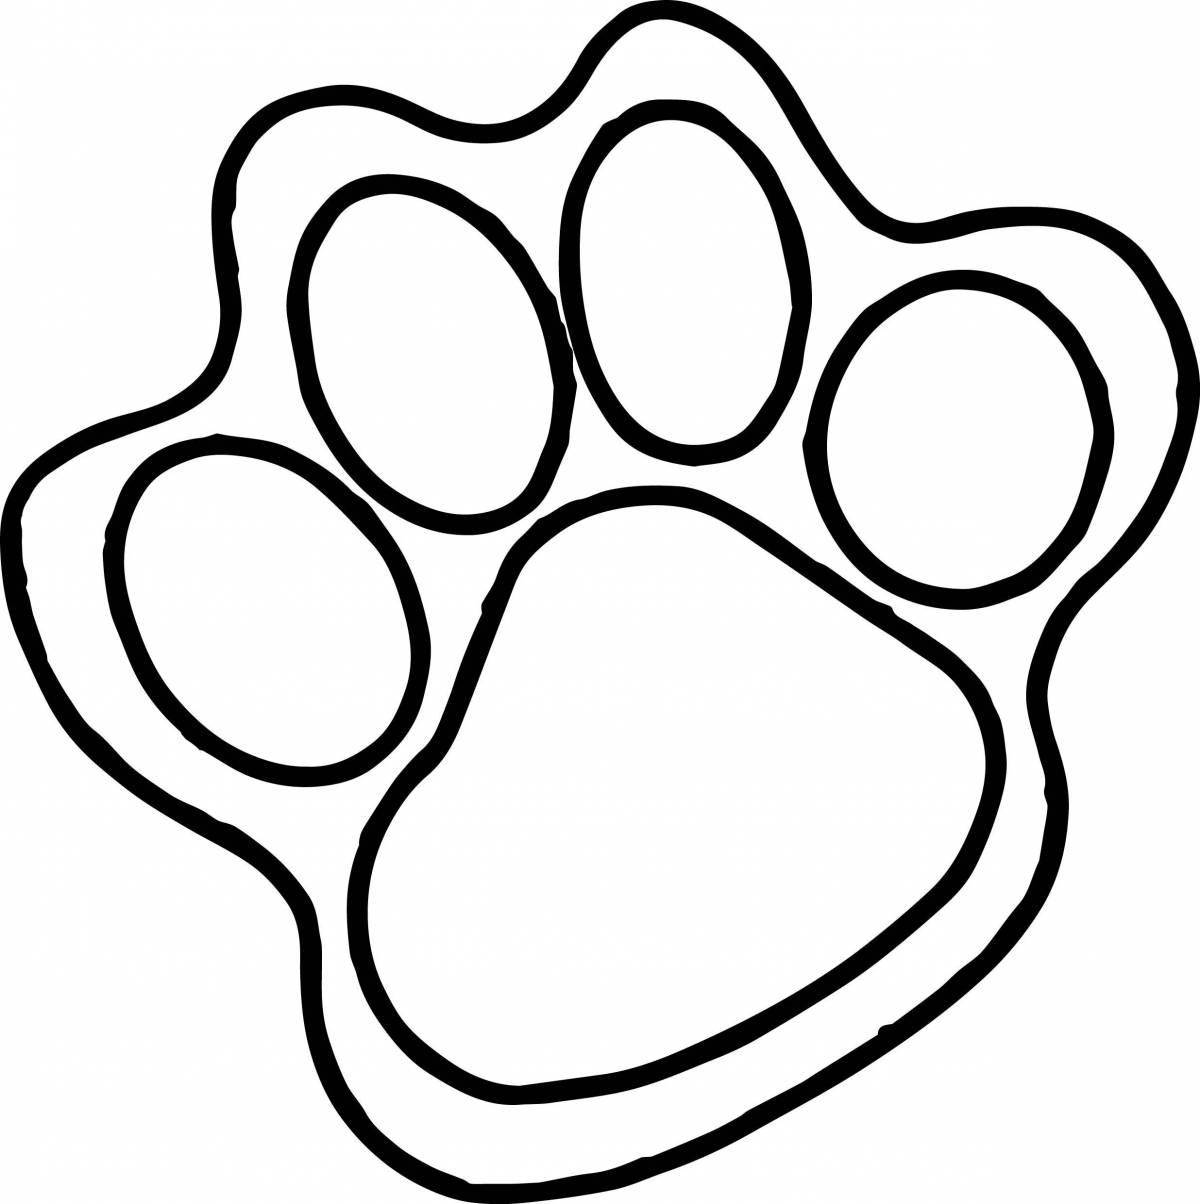 Adorable cat paw coloring page